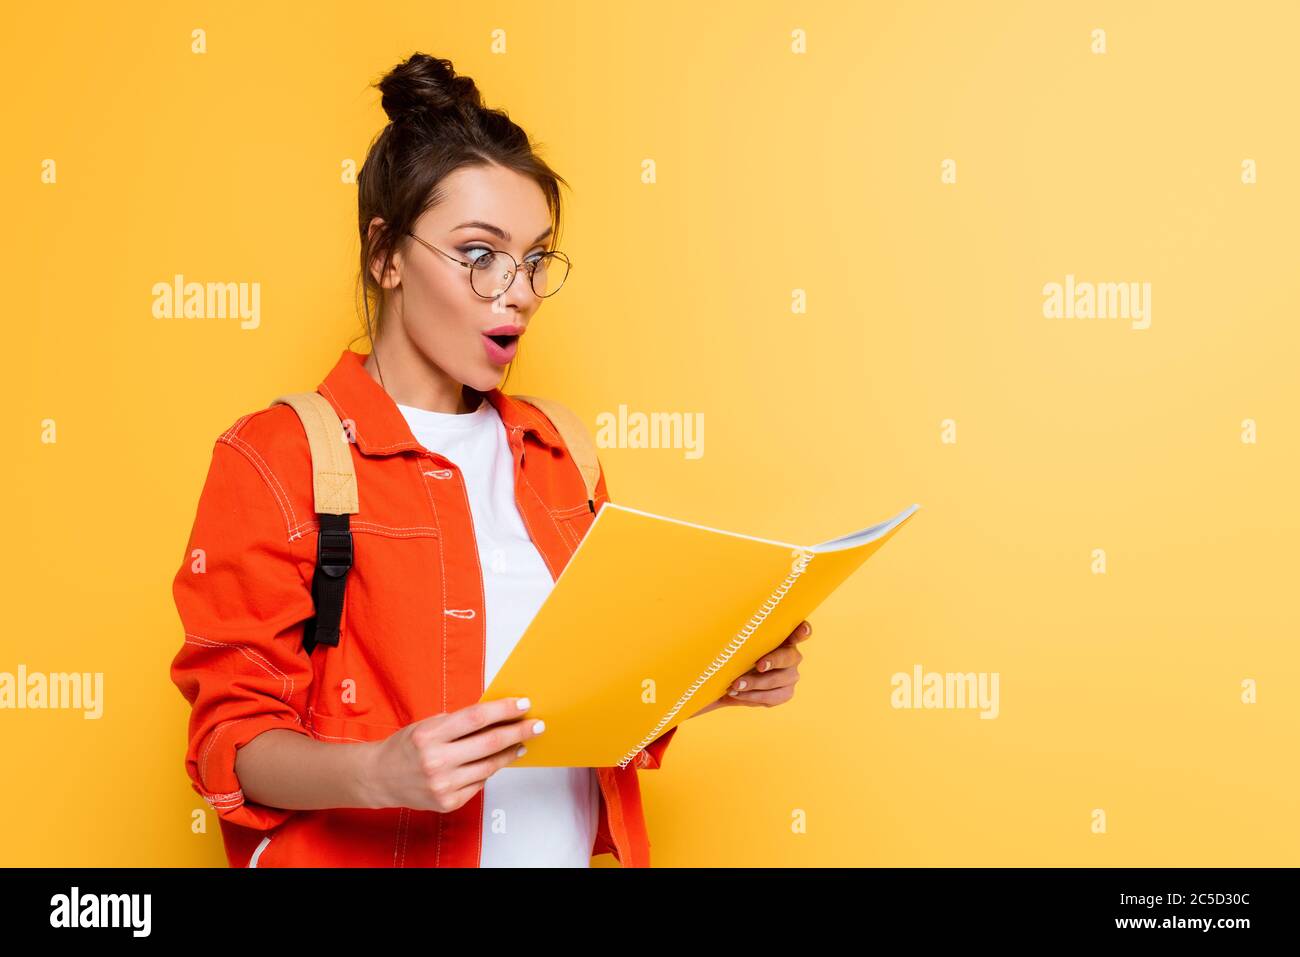 shocked student in glasses looking at copy book isolated on yellow Stock Photo